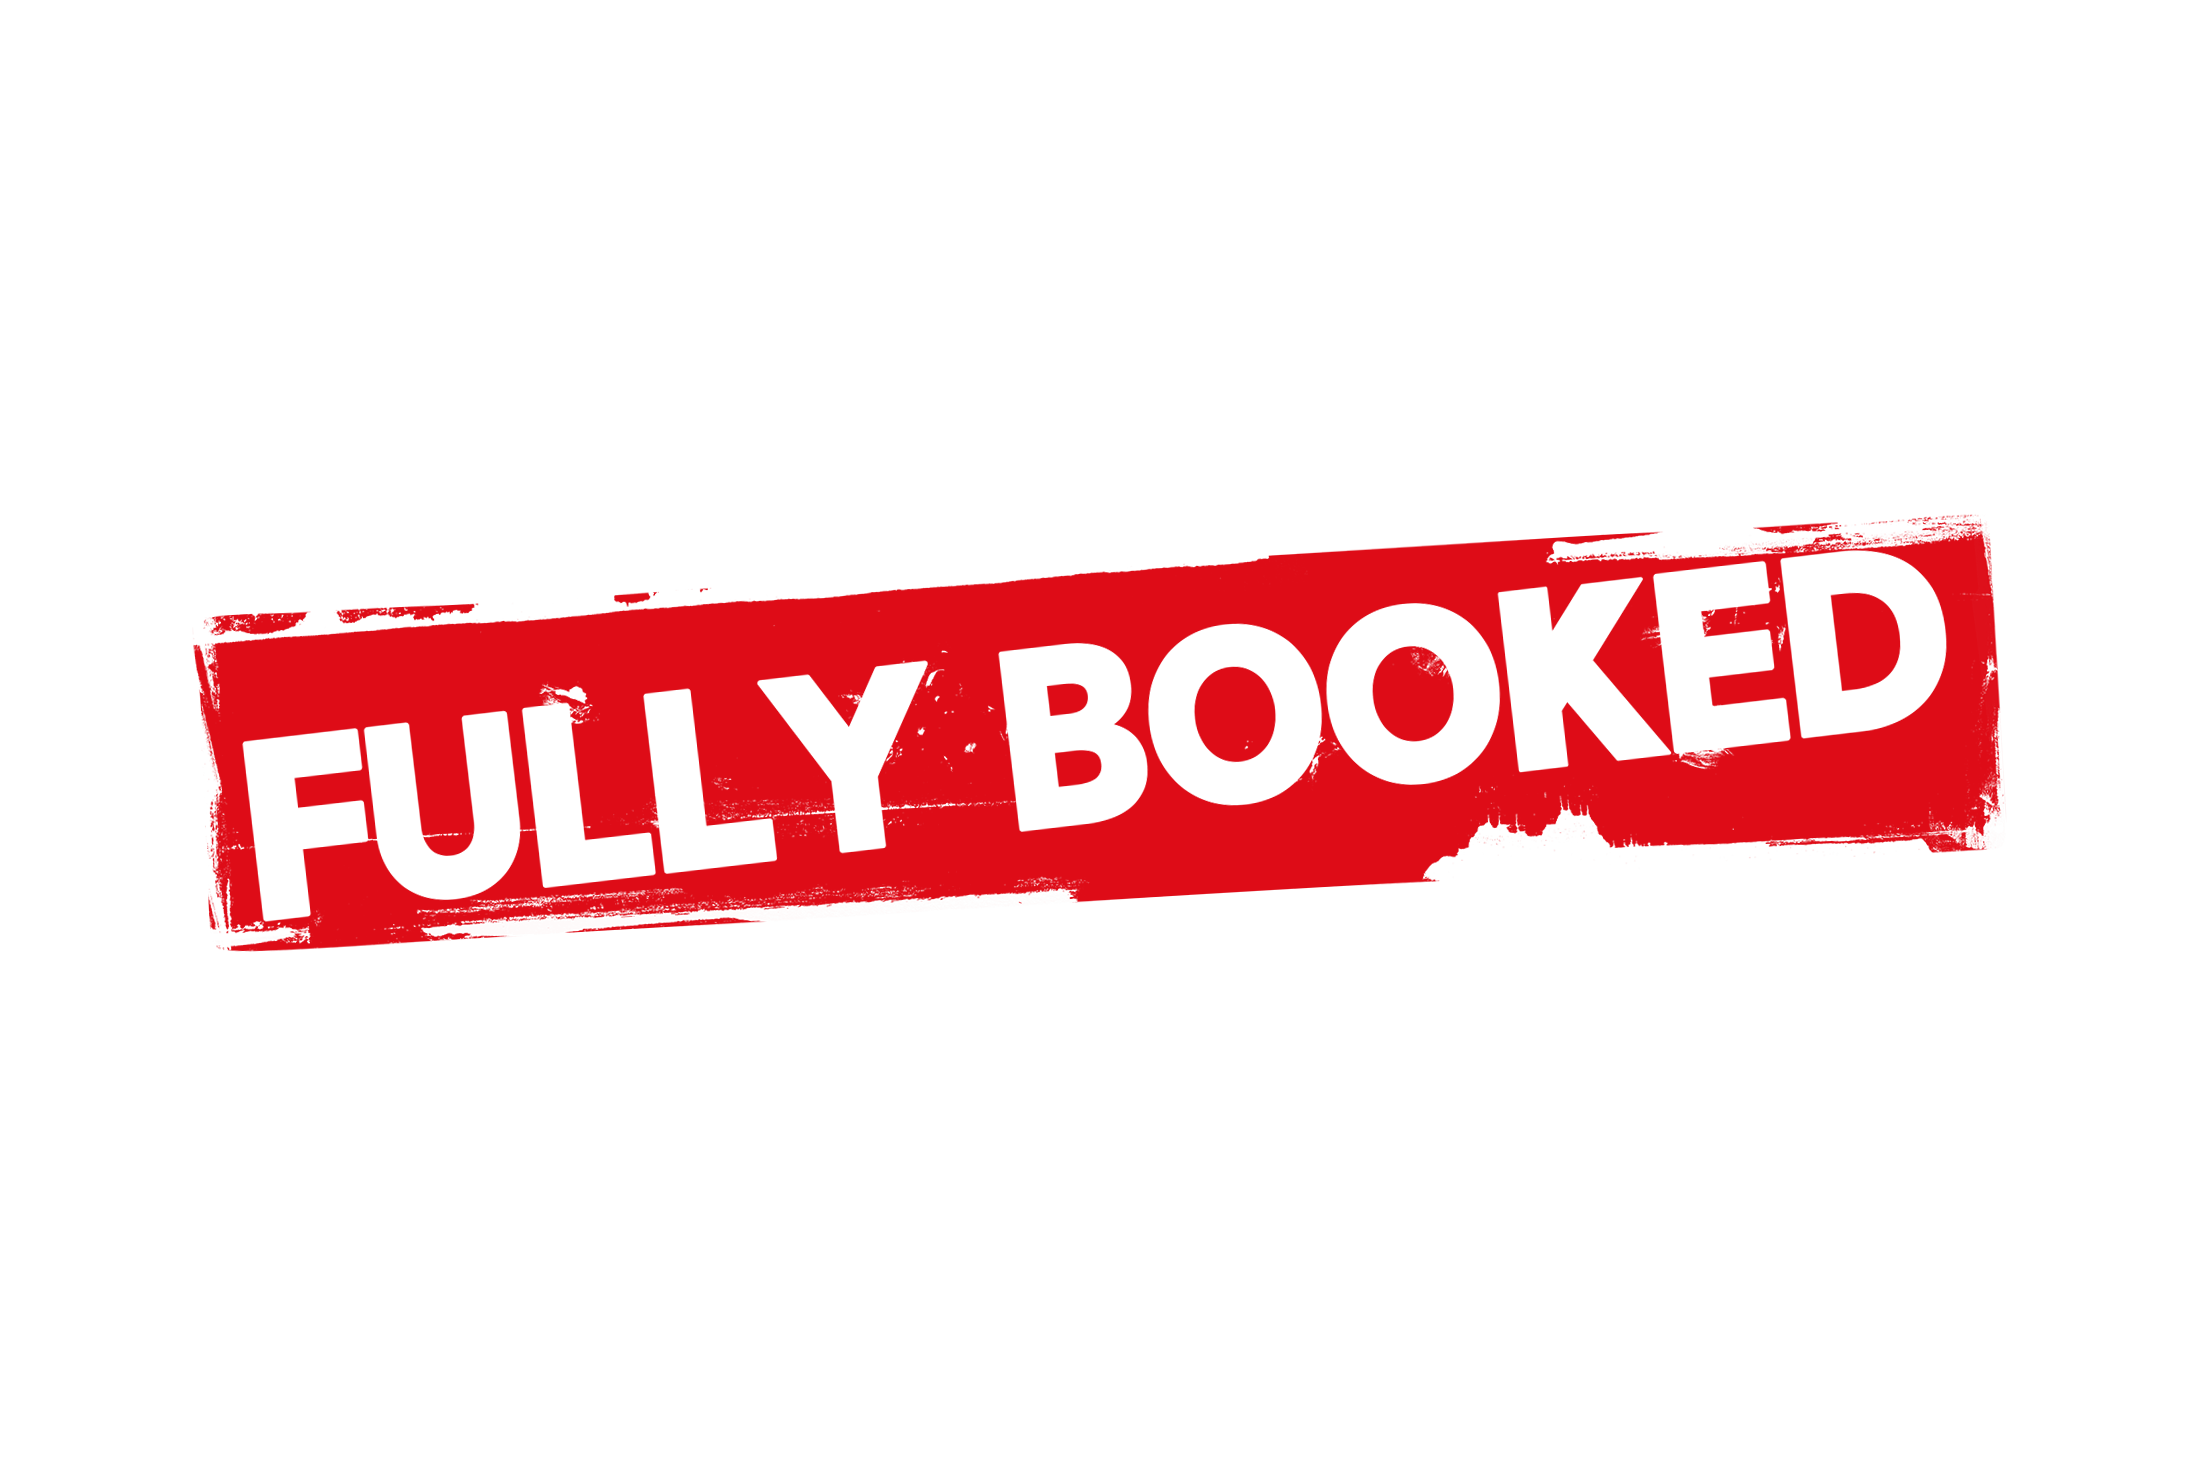 Grunge fully booked label PSD